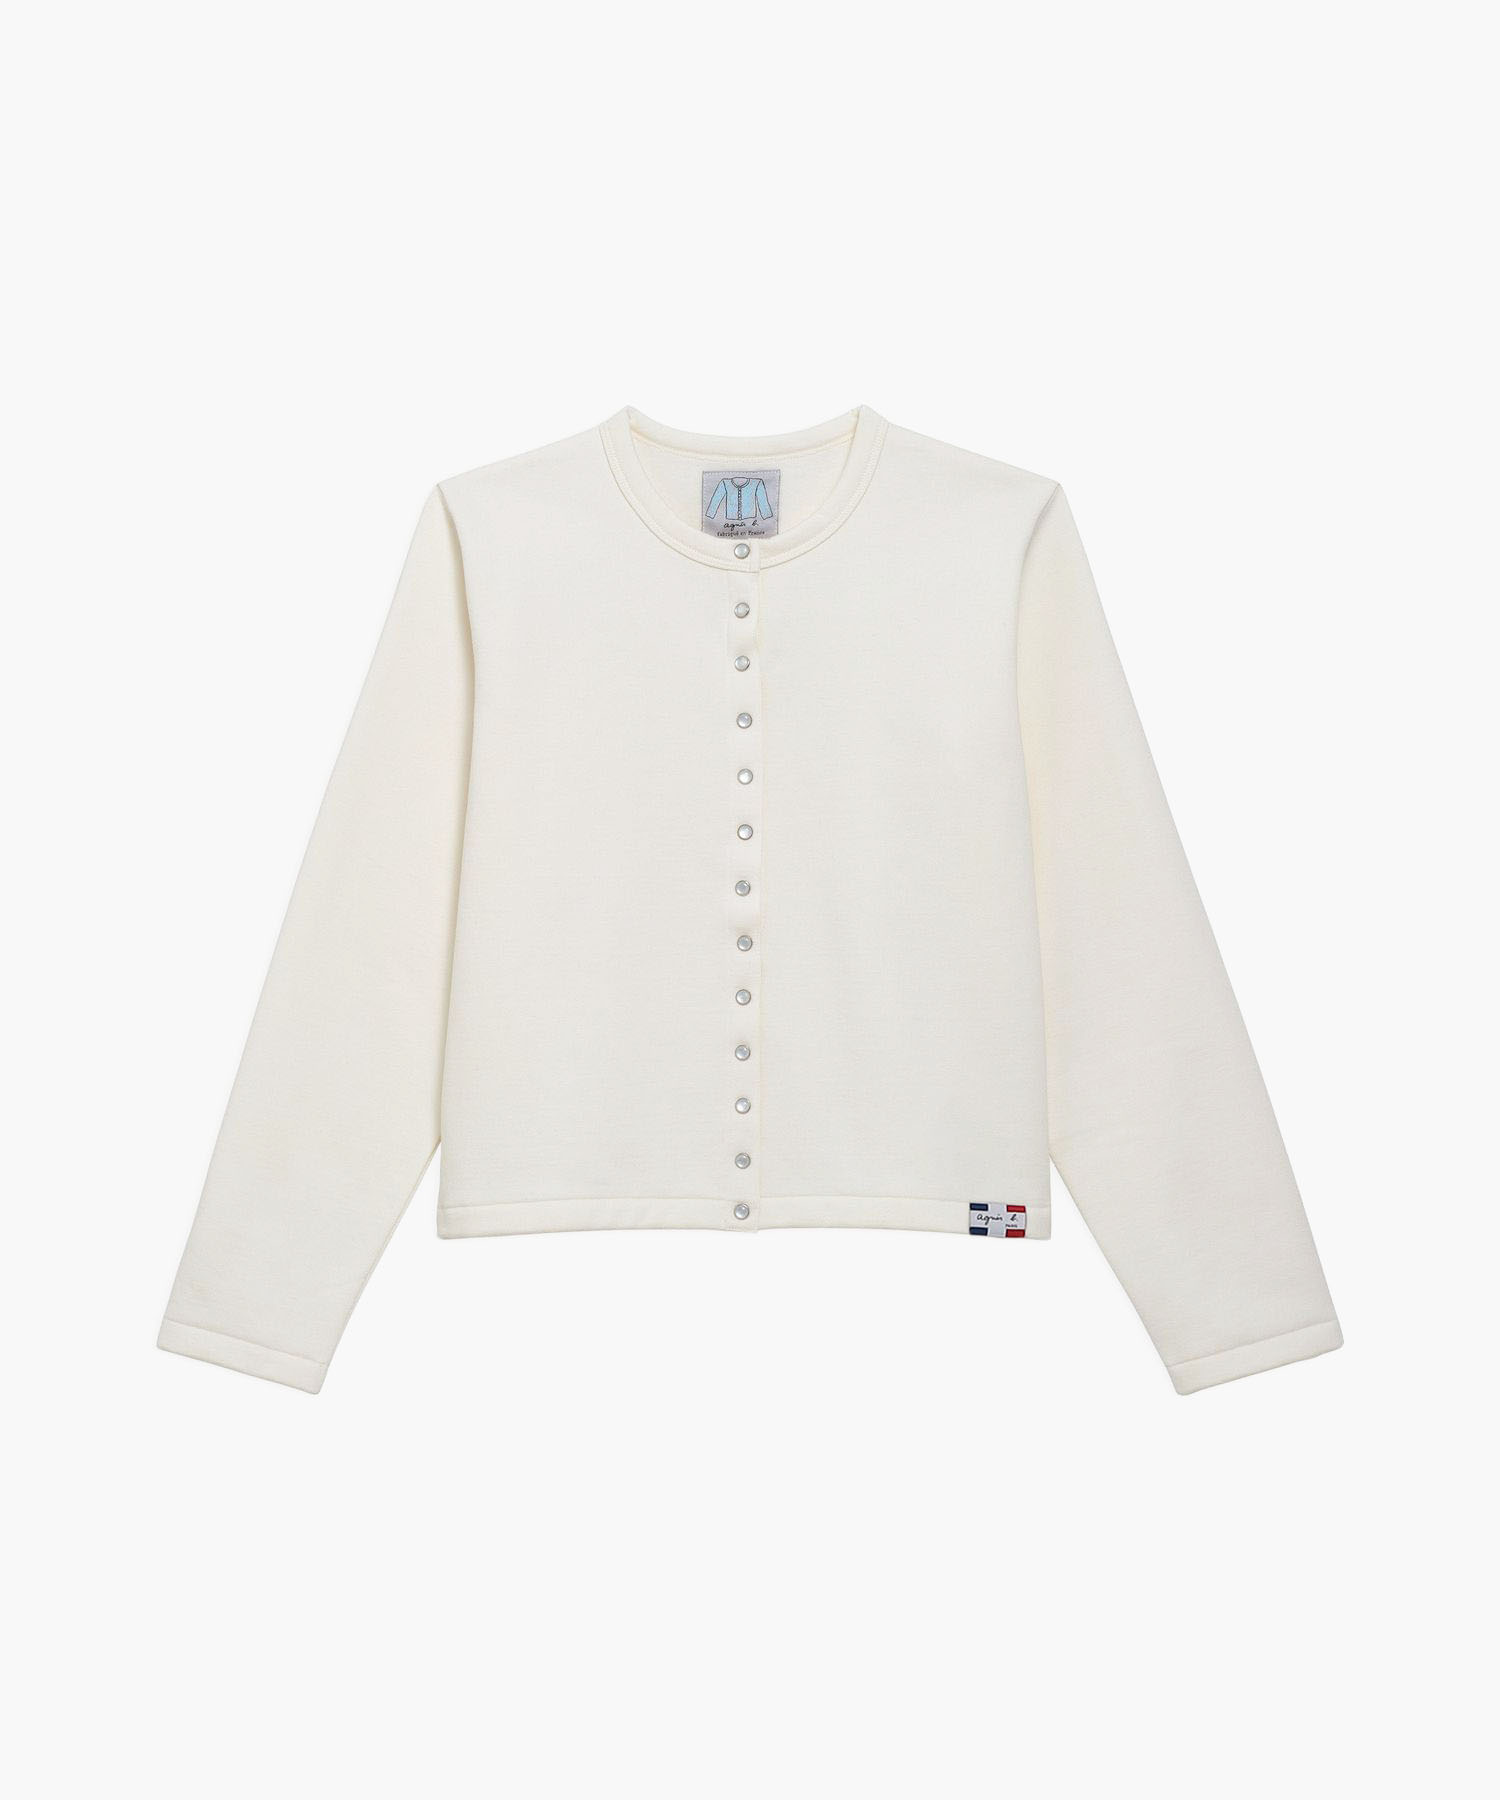 M001 CARDIGAN カーディガンプレッション [Made in France](505126266